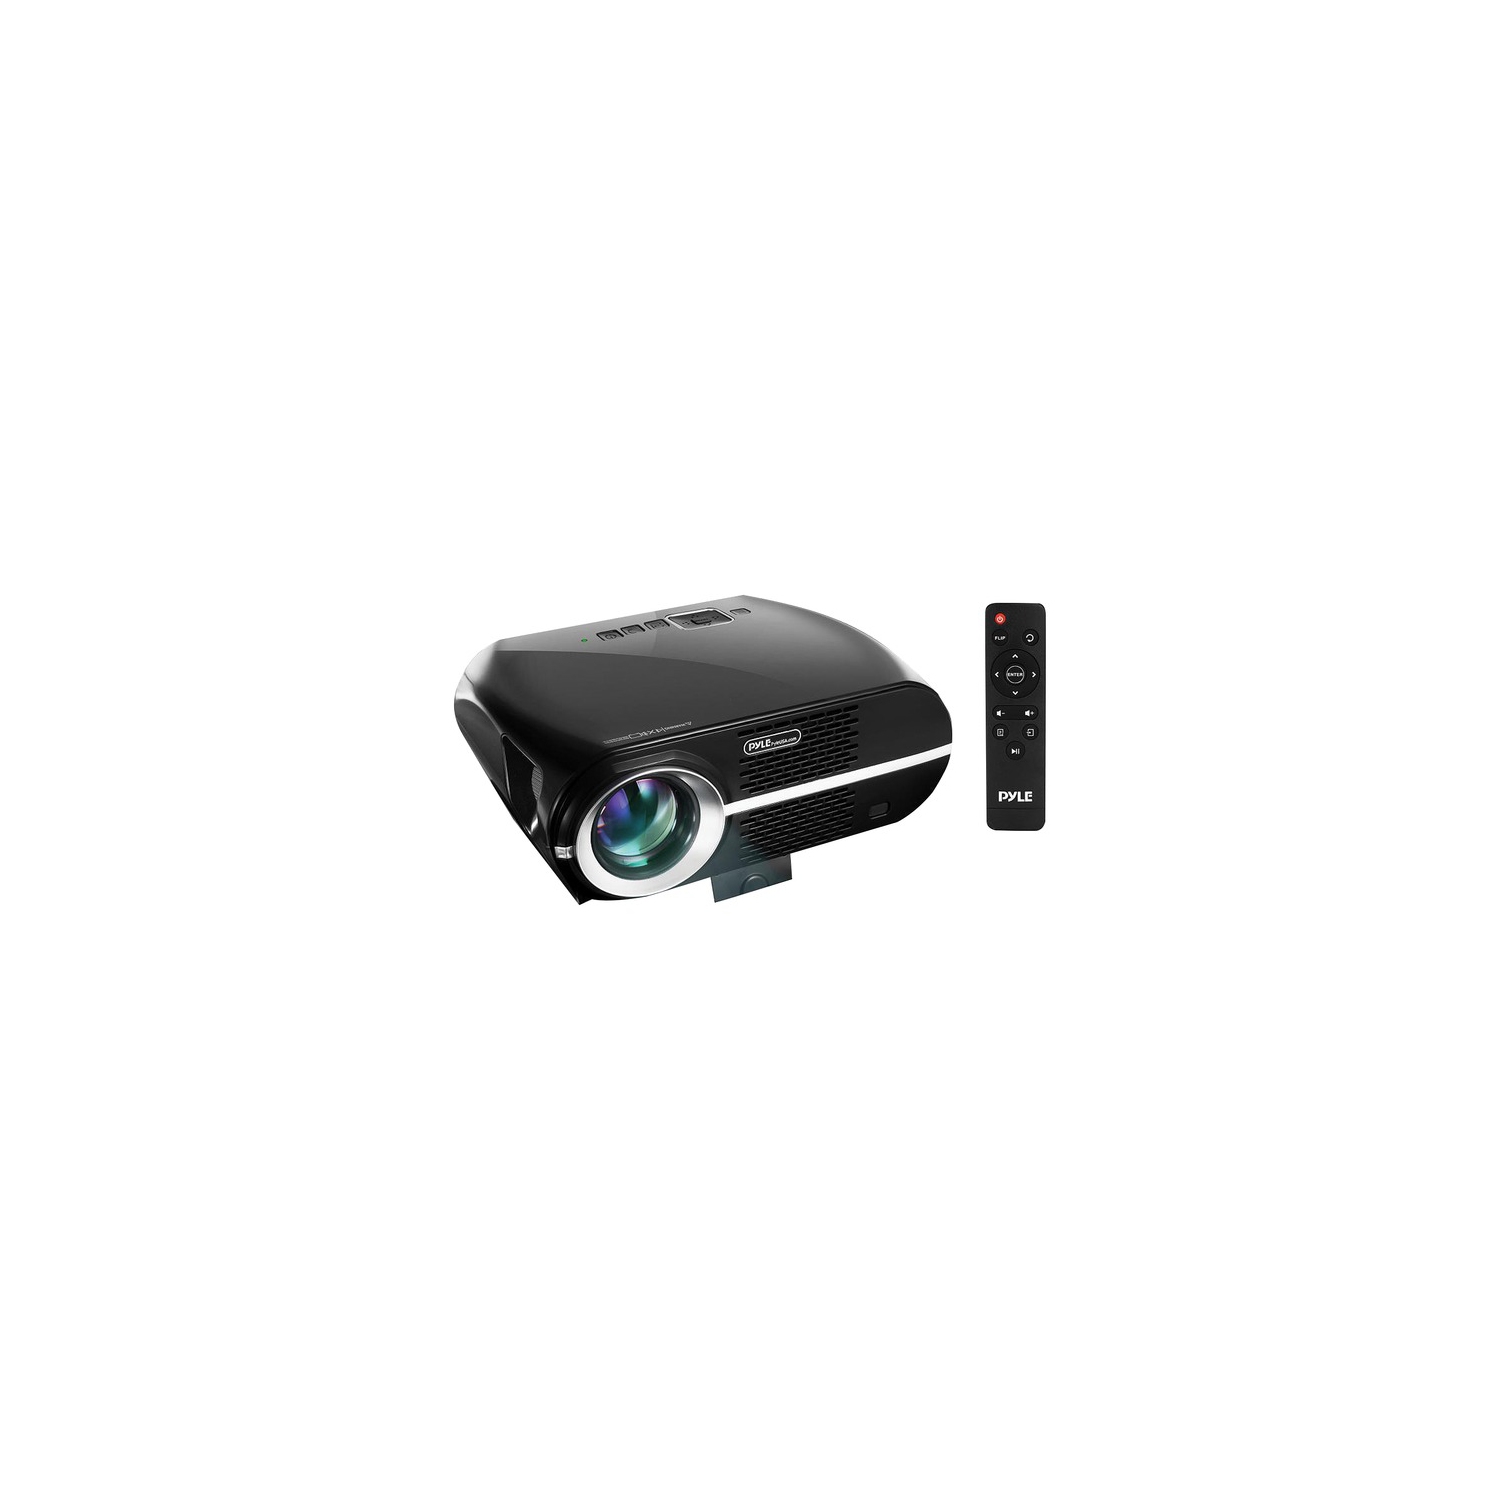 Pyle PRJLE67 1080p Full HD Home Theater Digital Projector